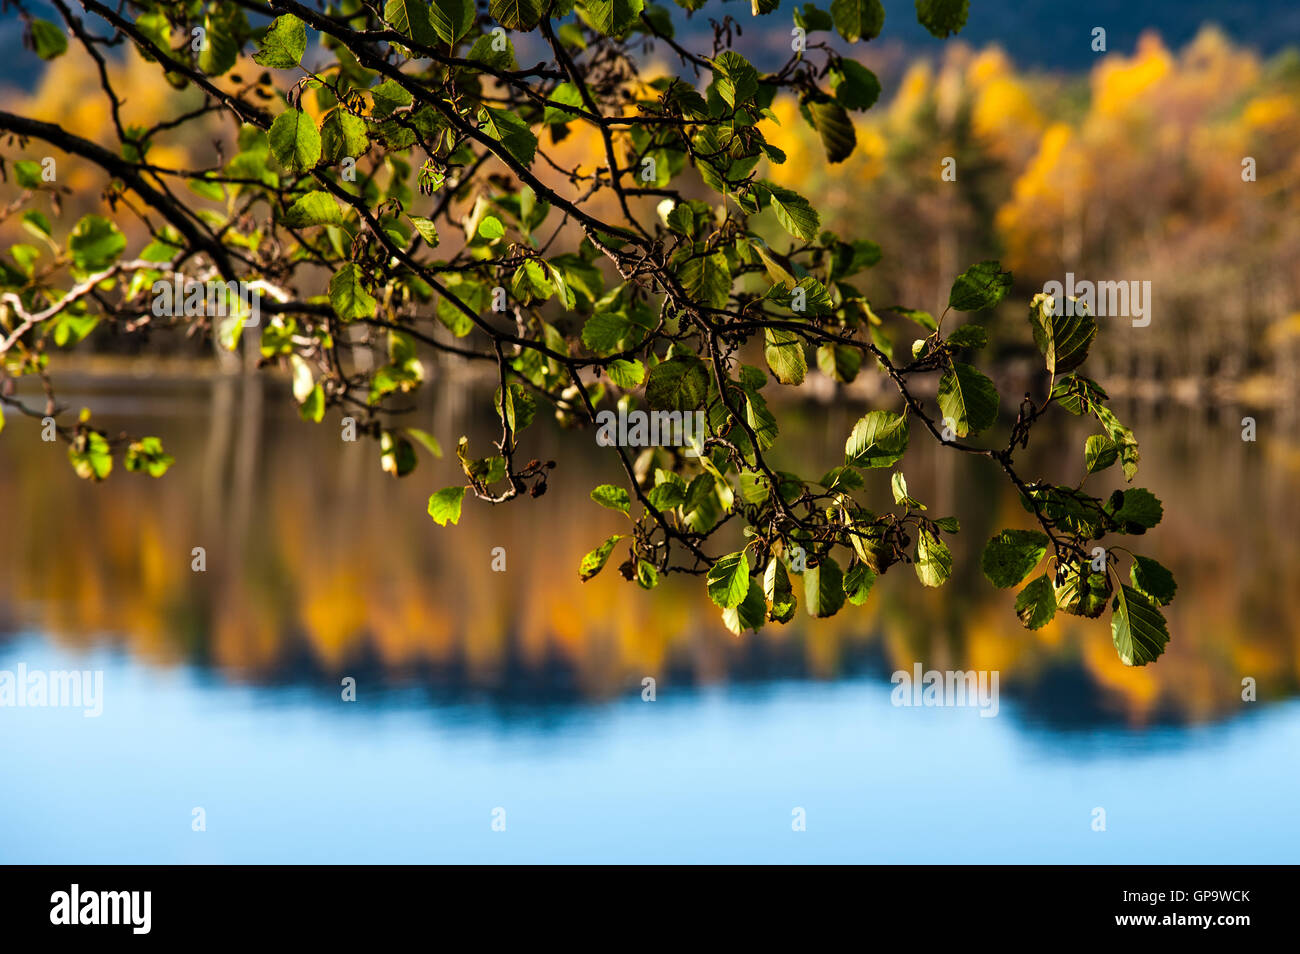 Imsvatnet, Sandnes, Norway. Colourful autumn colours, alder with still green leaves. Stock Photo